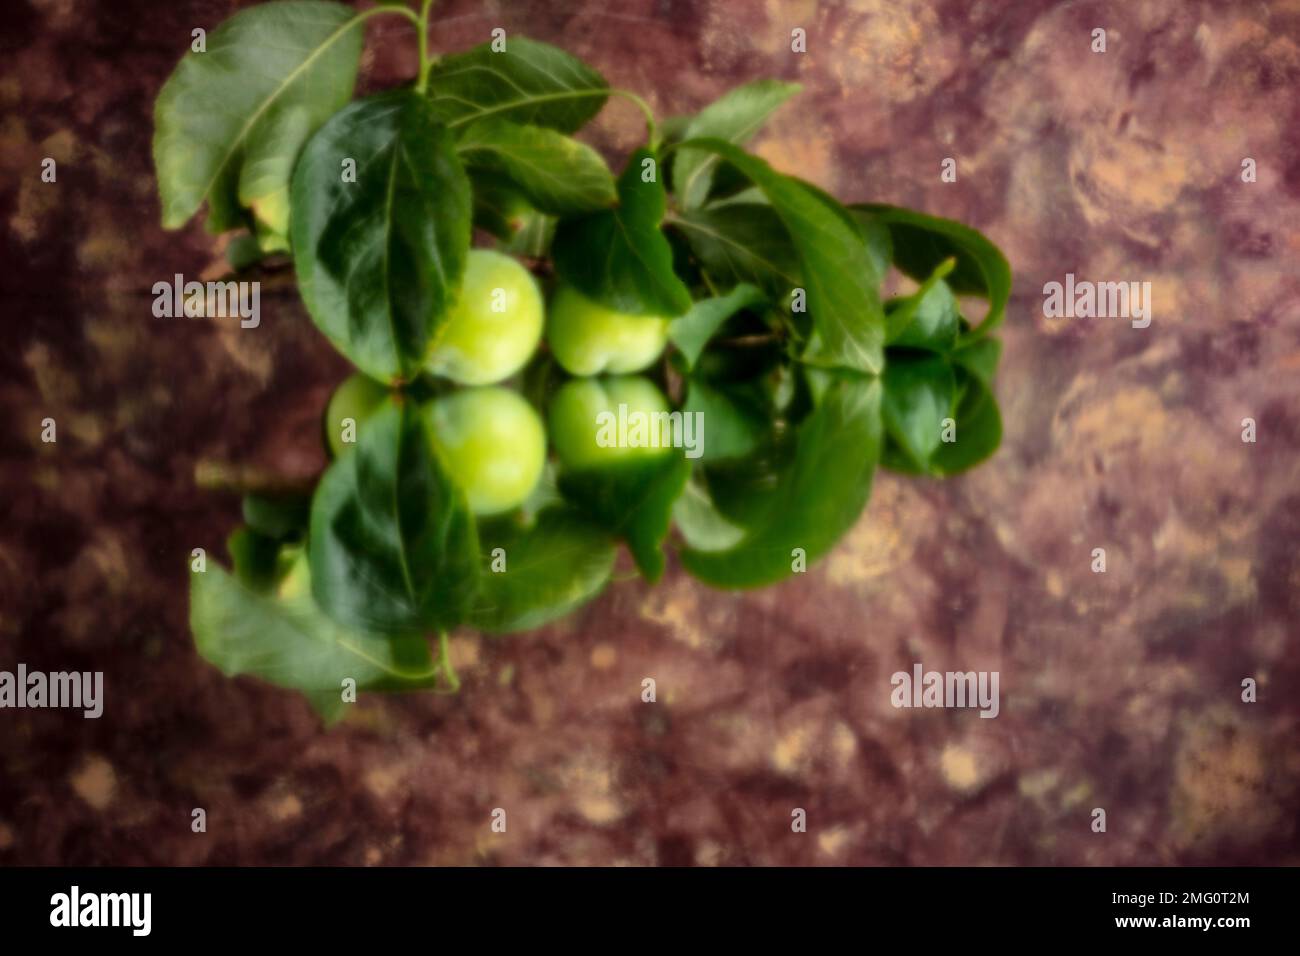 New, Age-defying, digital age, lensless, stand-out, high resolution, pinhole image of sweet and juicy Greengages with reflection. Food closeup Stock Photo